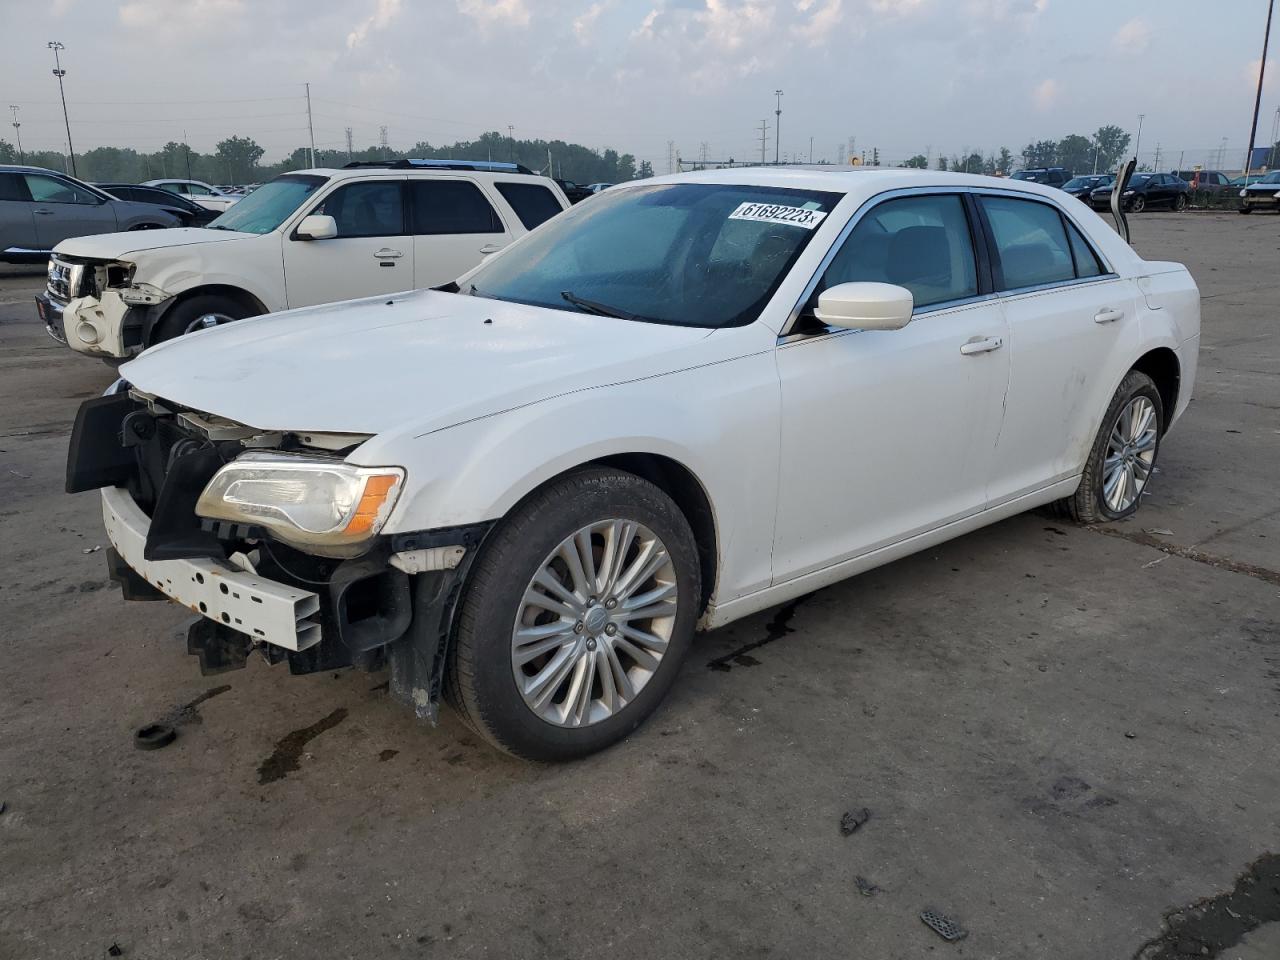 vin: 2C3CCARG9DH551785 2C3CCARG9DH551785 2013 chrysler 300 3600 for Sale in 48183 4366, Mi - Detroit, Woodhaven, USA